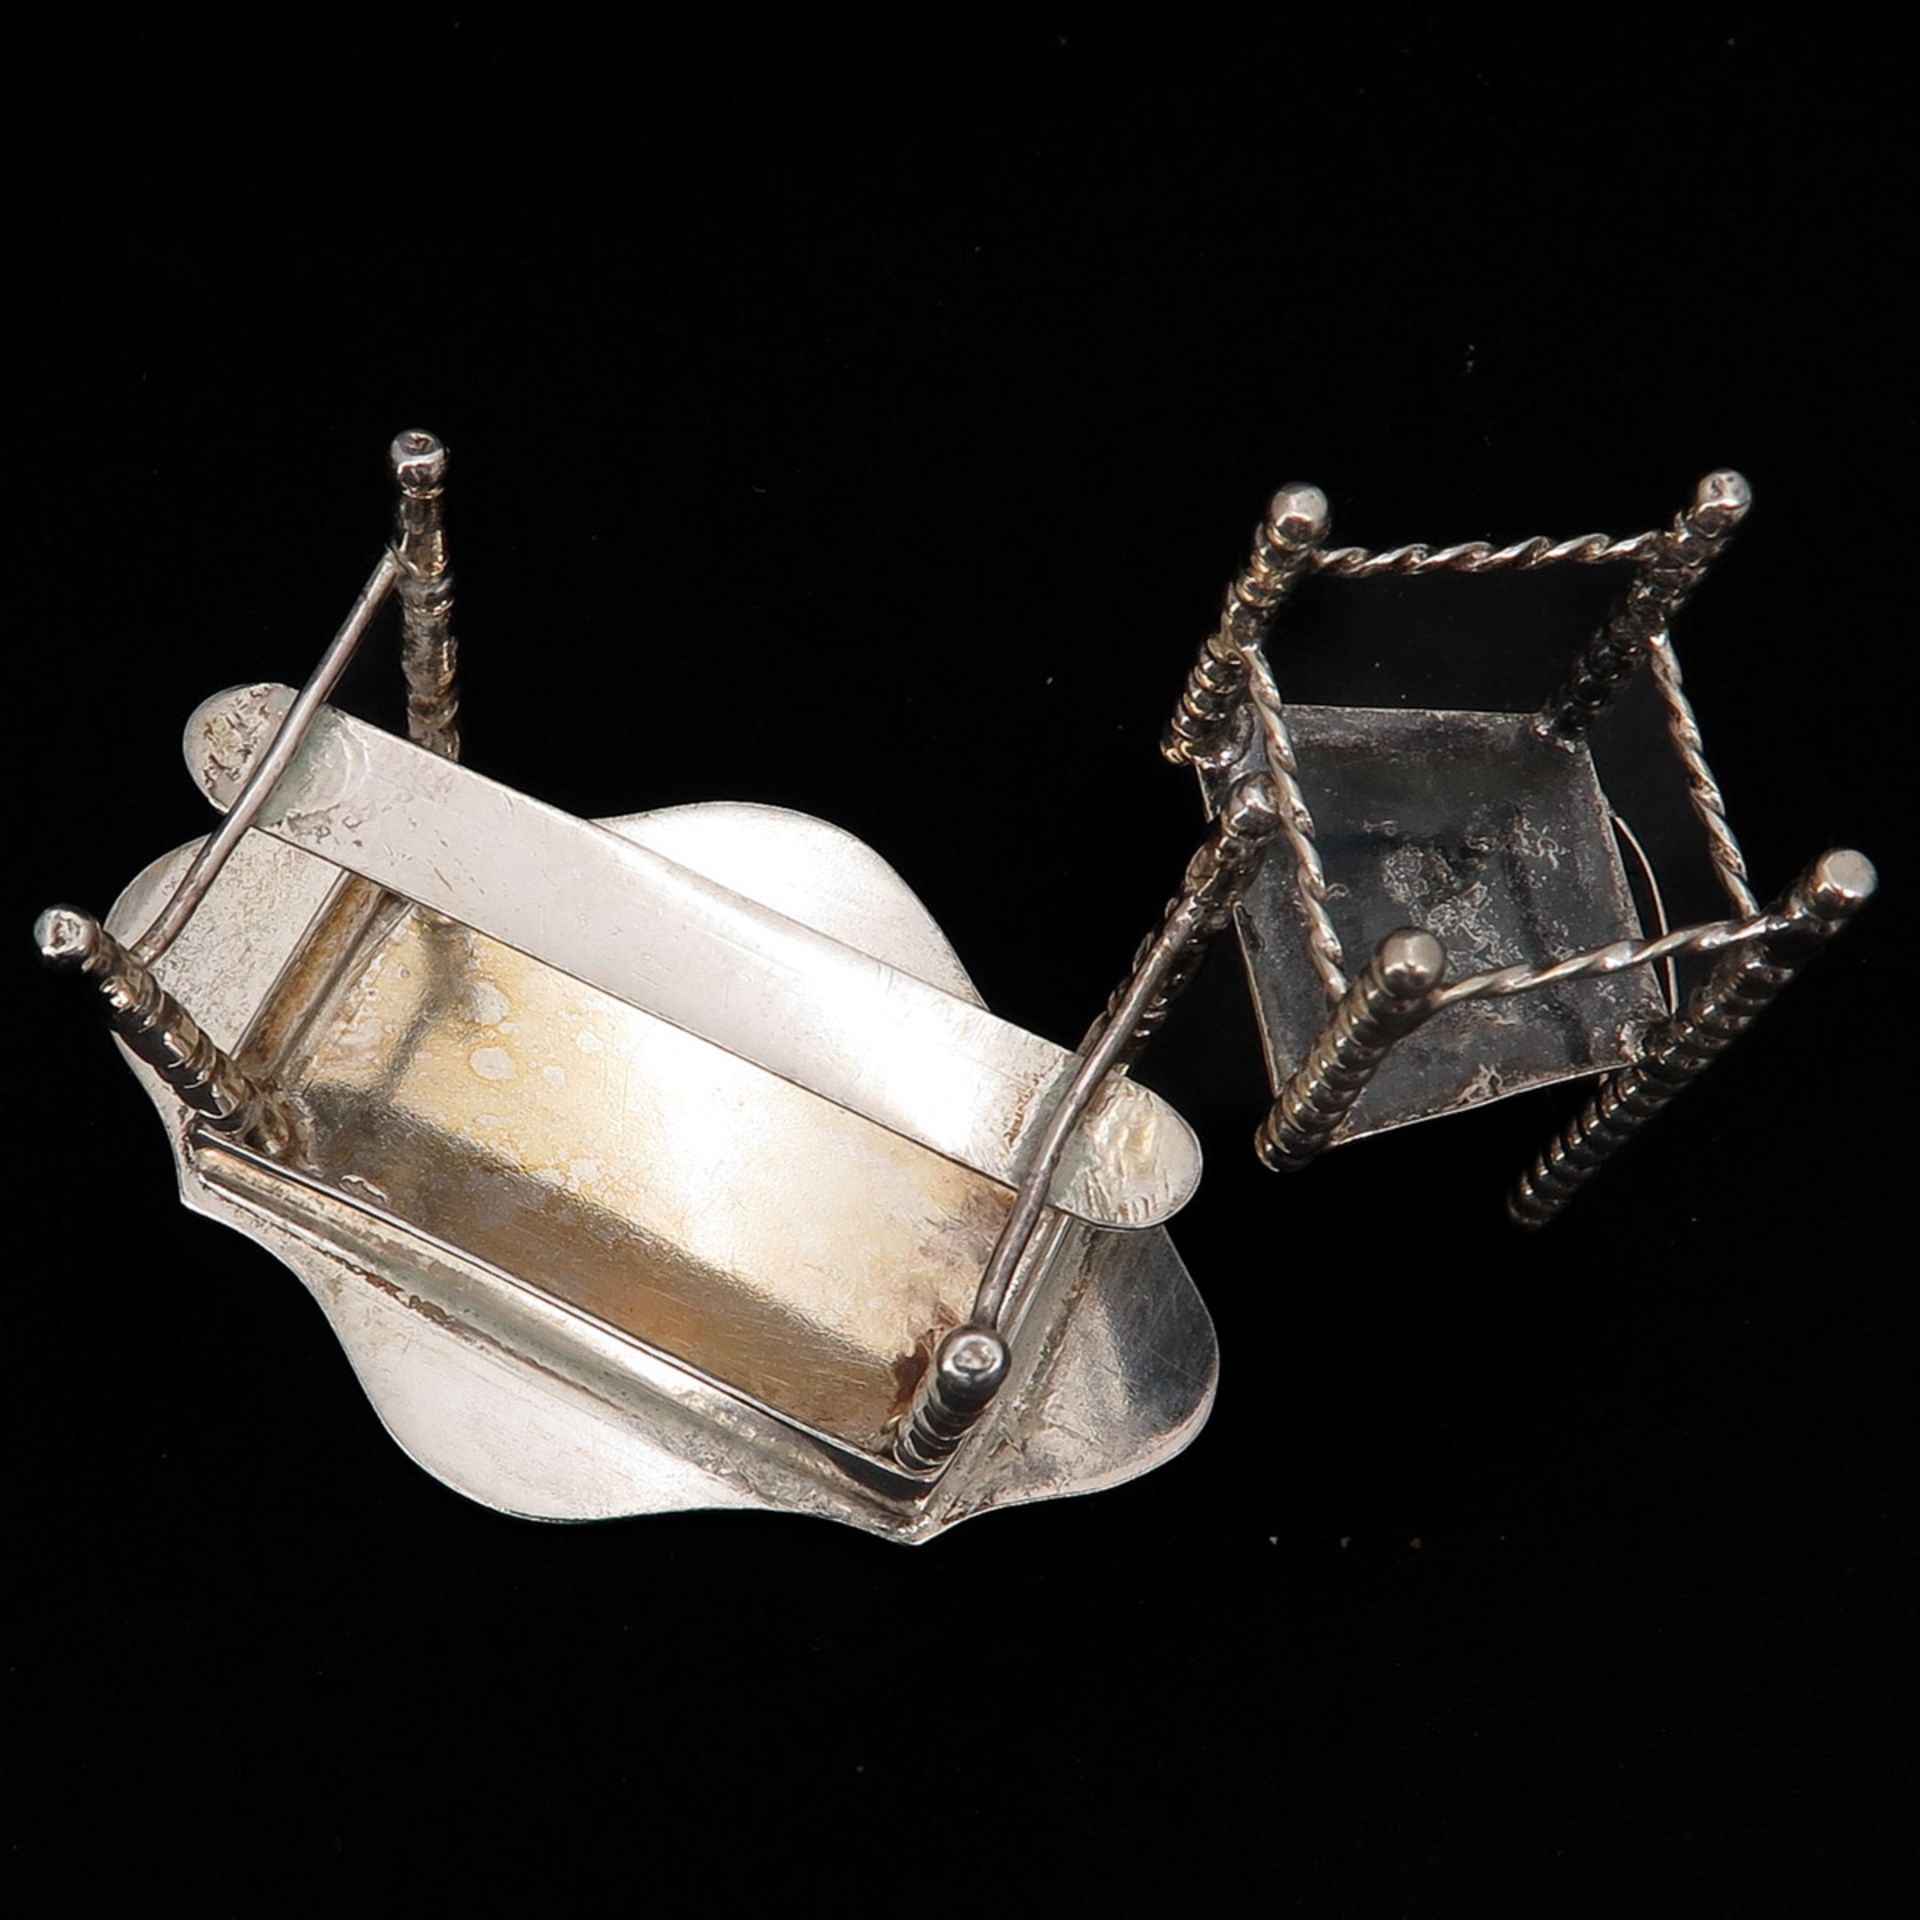 A Miniature Silver Table and Chair - Image 6 of 7